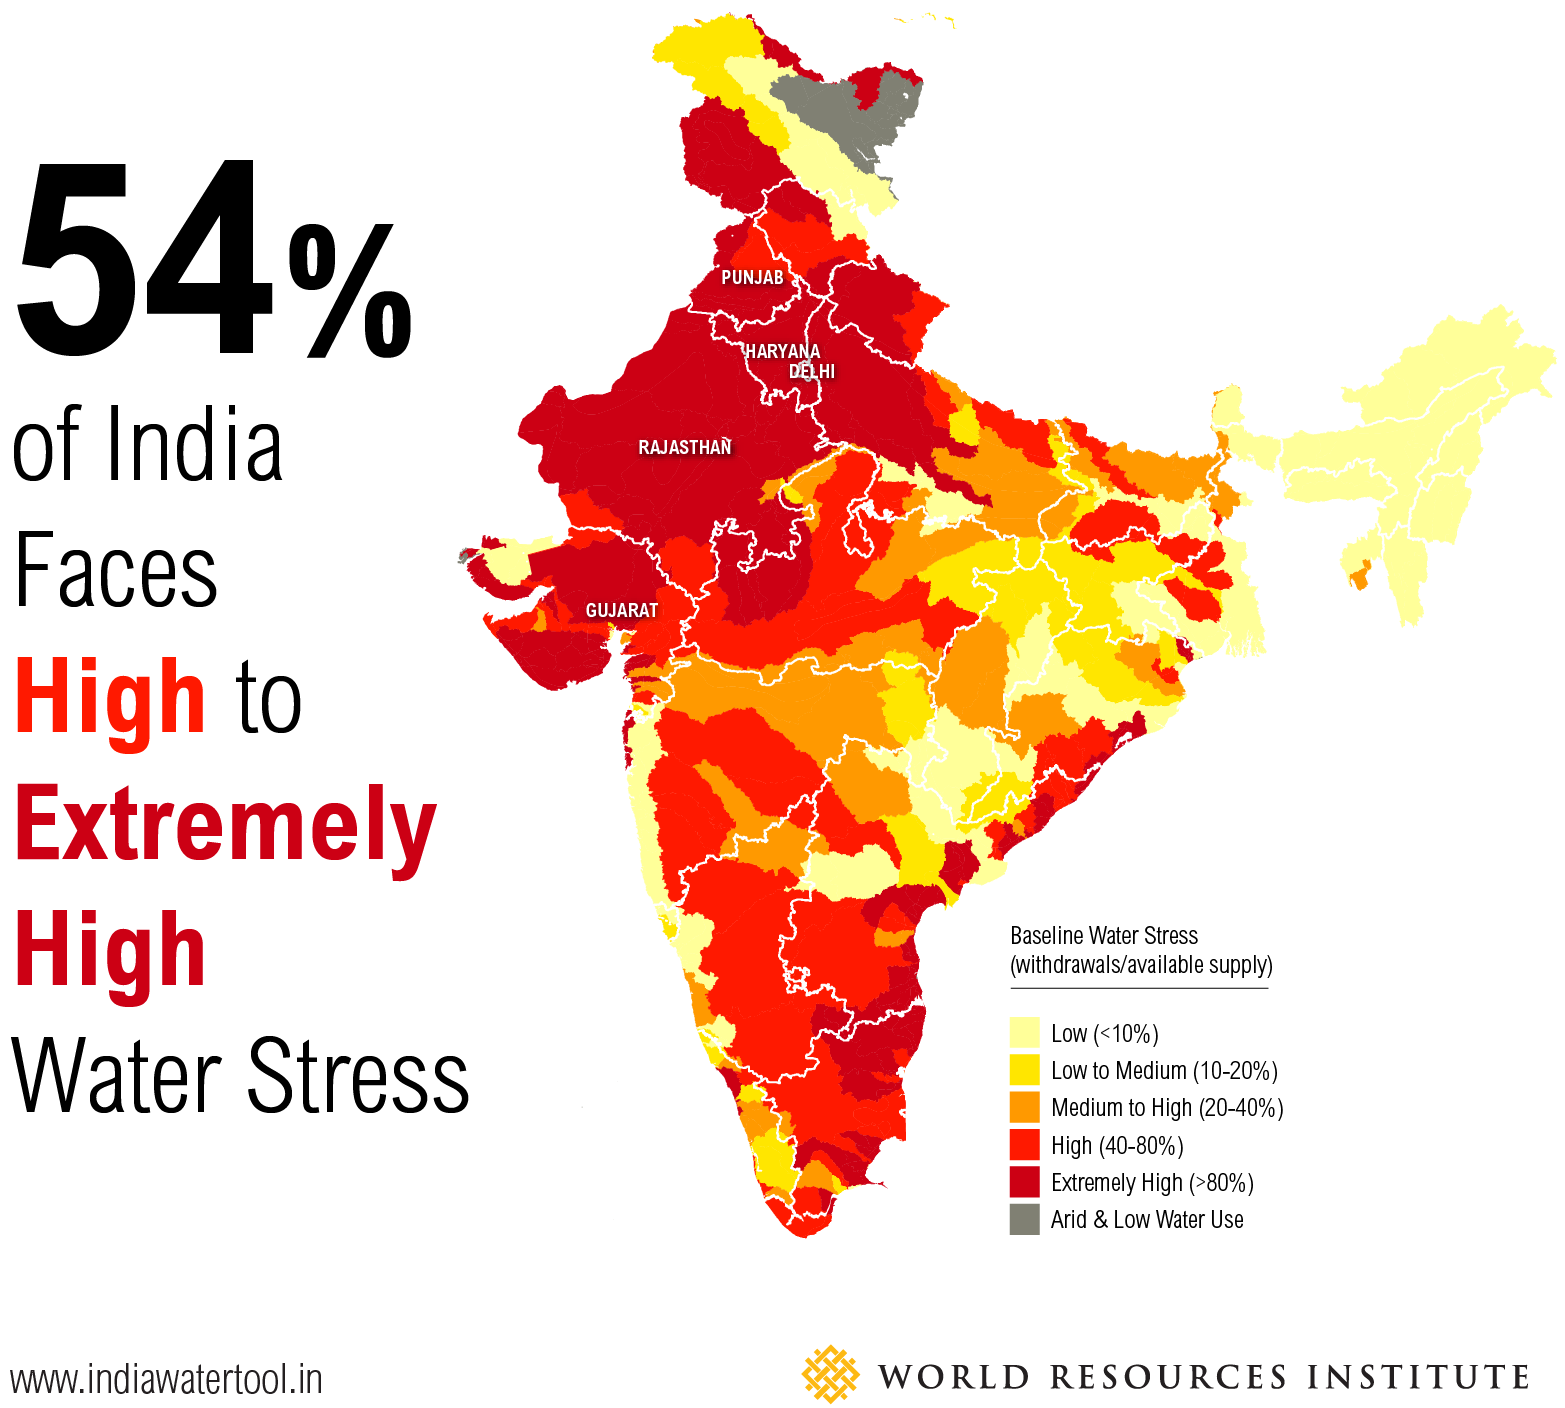 Water Scarcity in India